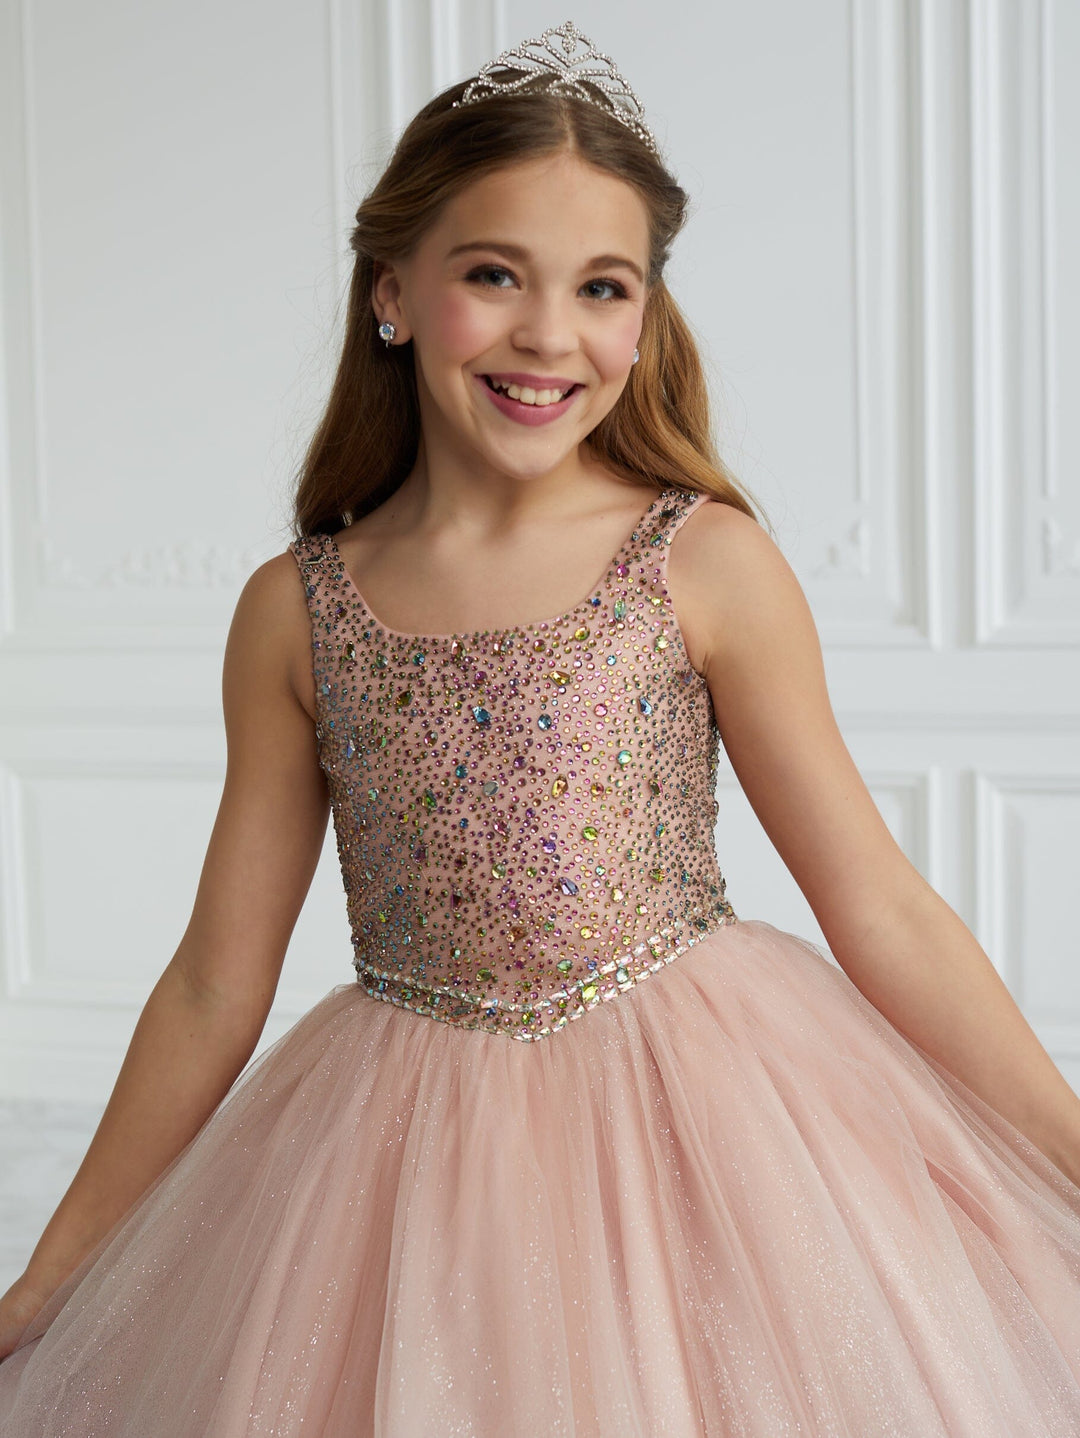 Girls Beaded Ombre Tulle Gown by Tiffany Princess 13676